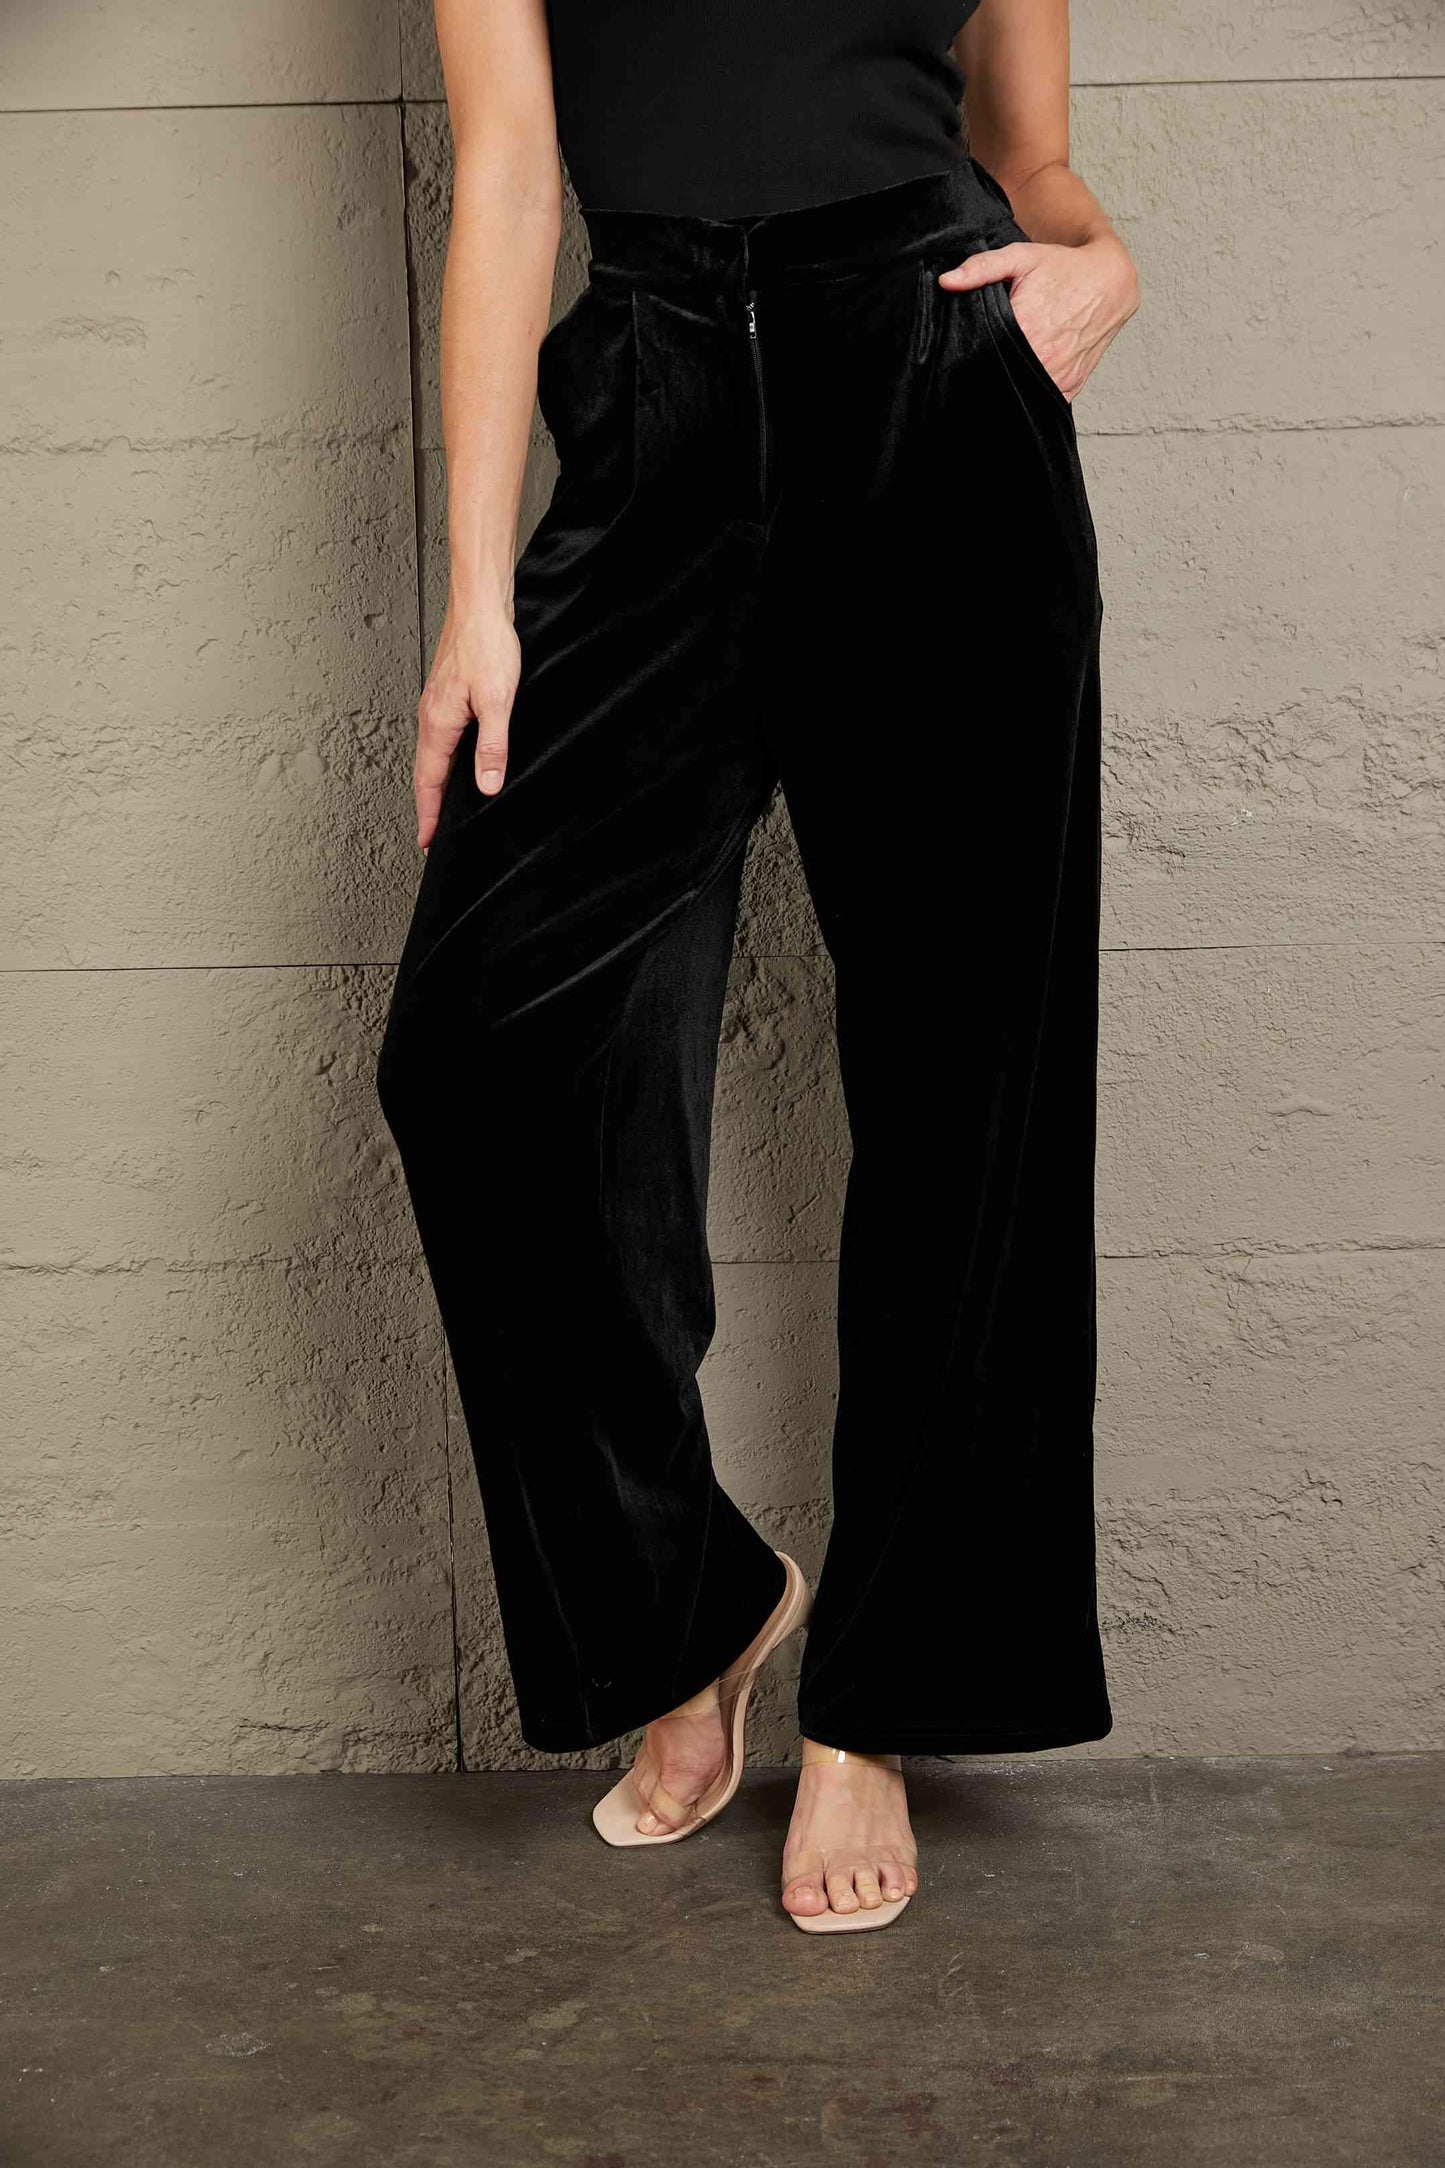 Double Take Loose Fit High Waist Long Pants with Pockets - Lab Fashion, Home & Health